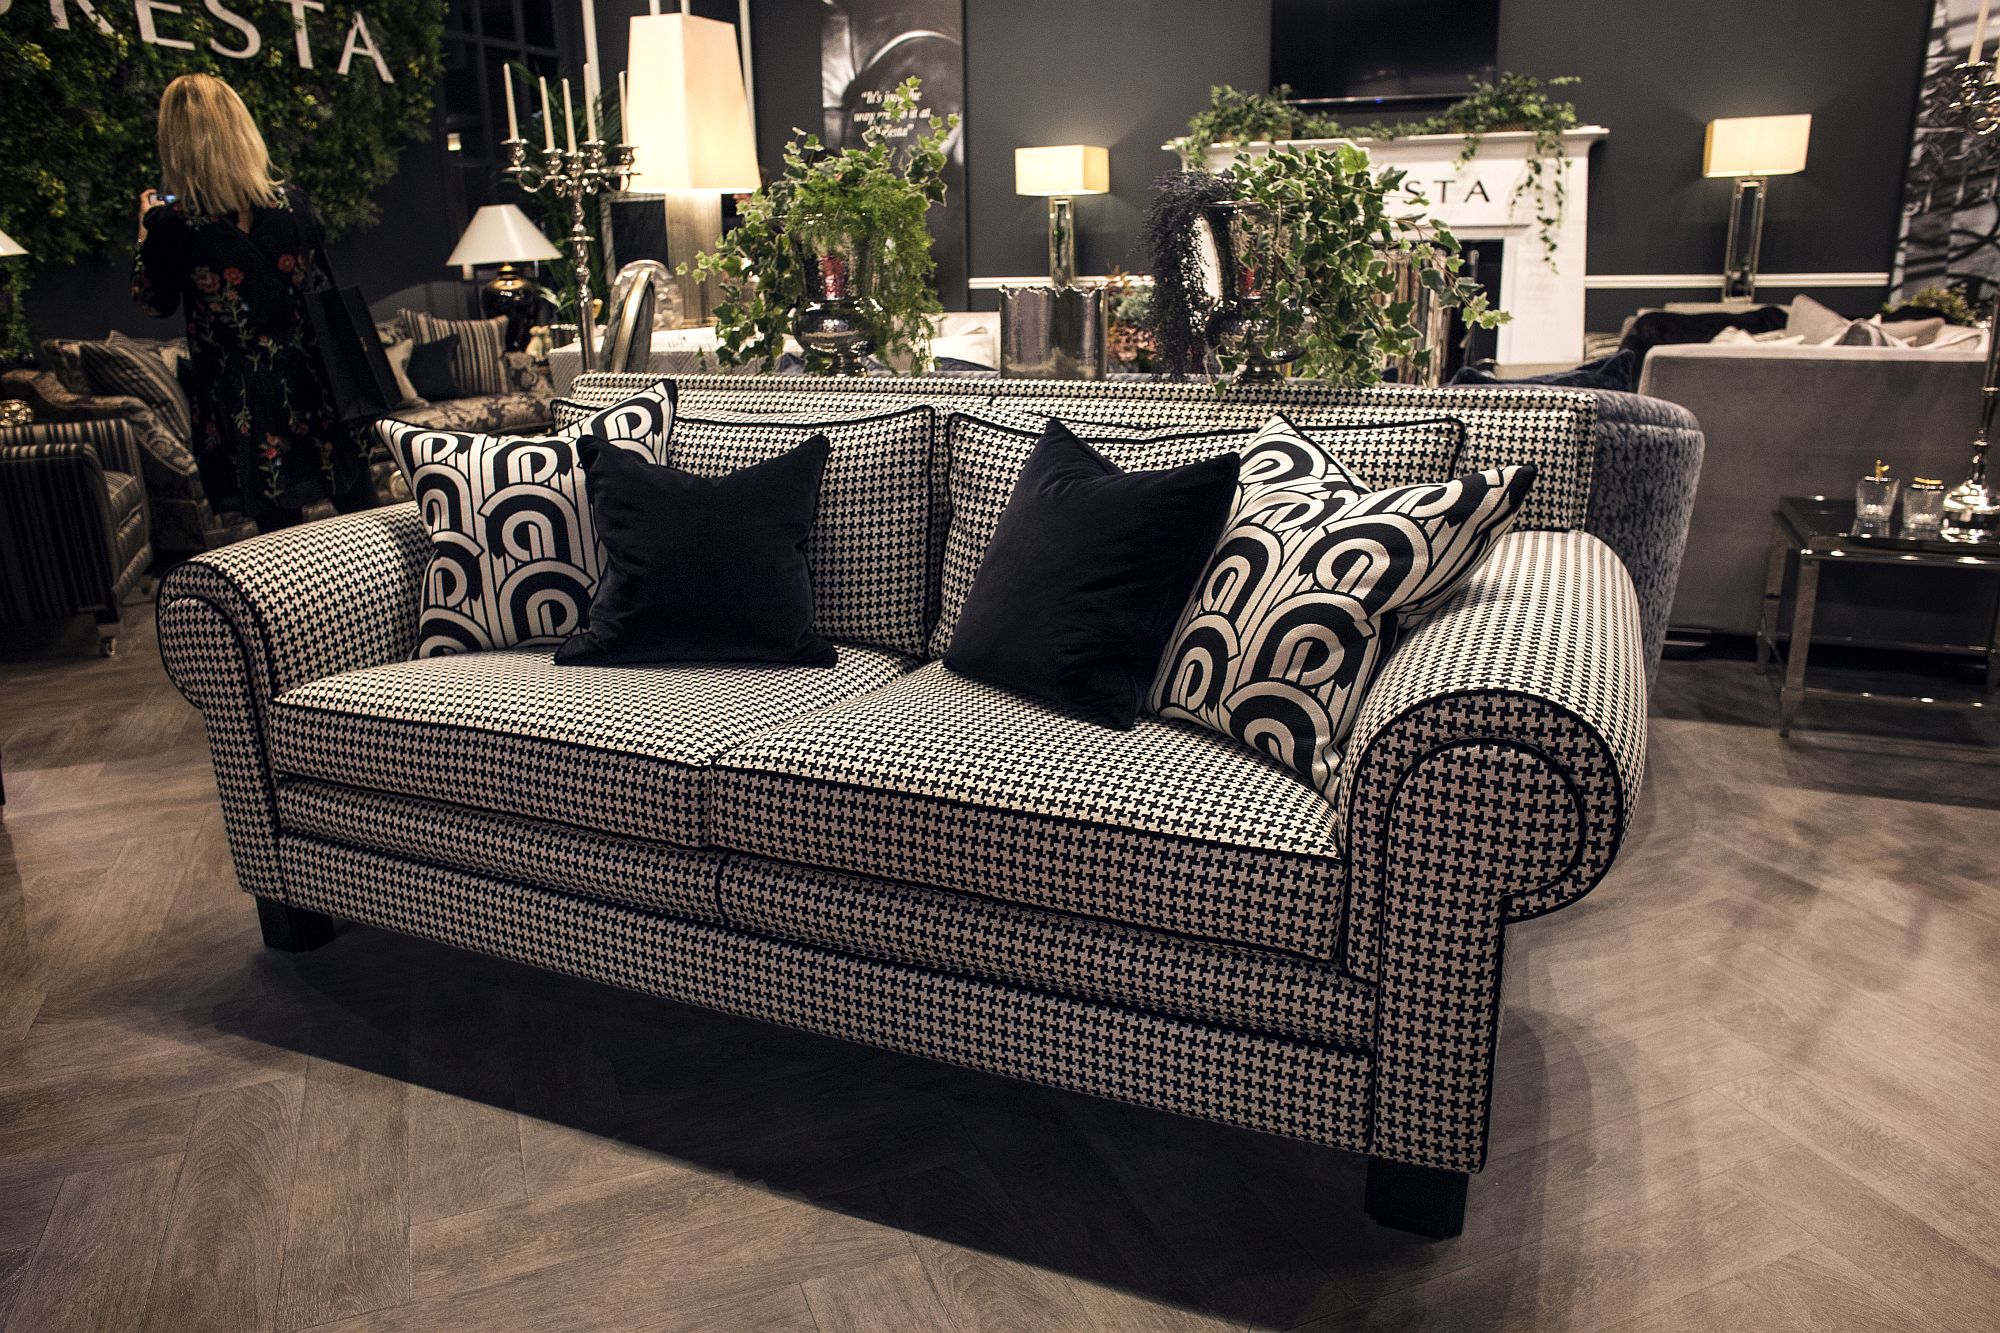 Simple black and white pattern of the sofa brings unique charm to any living space it adorns